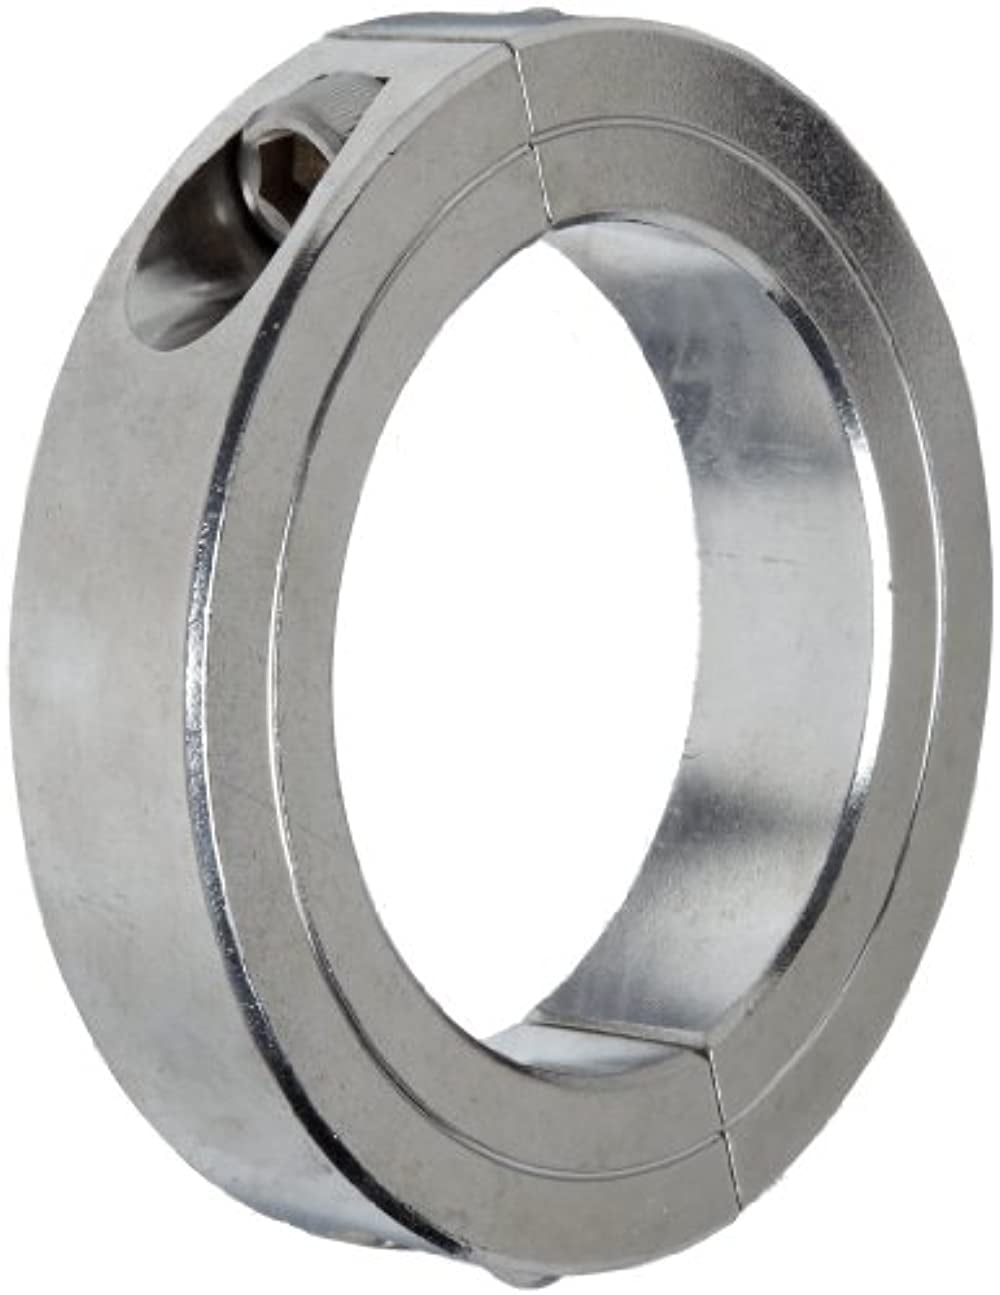 With 1/4-28 x 3/4 Set Screw 1-7/16 Bore Size 2-1/4 OD Climax Metal Products 1-7/16 Bore Size 2-1/4 OD Climax Metal 1C-143-S T303 Stainless Steel One-Piece Clamping Collar 